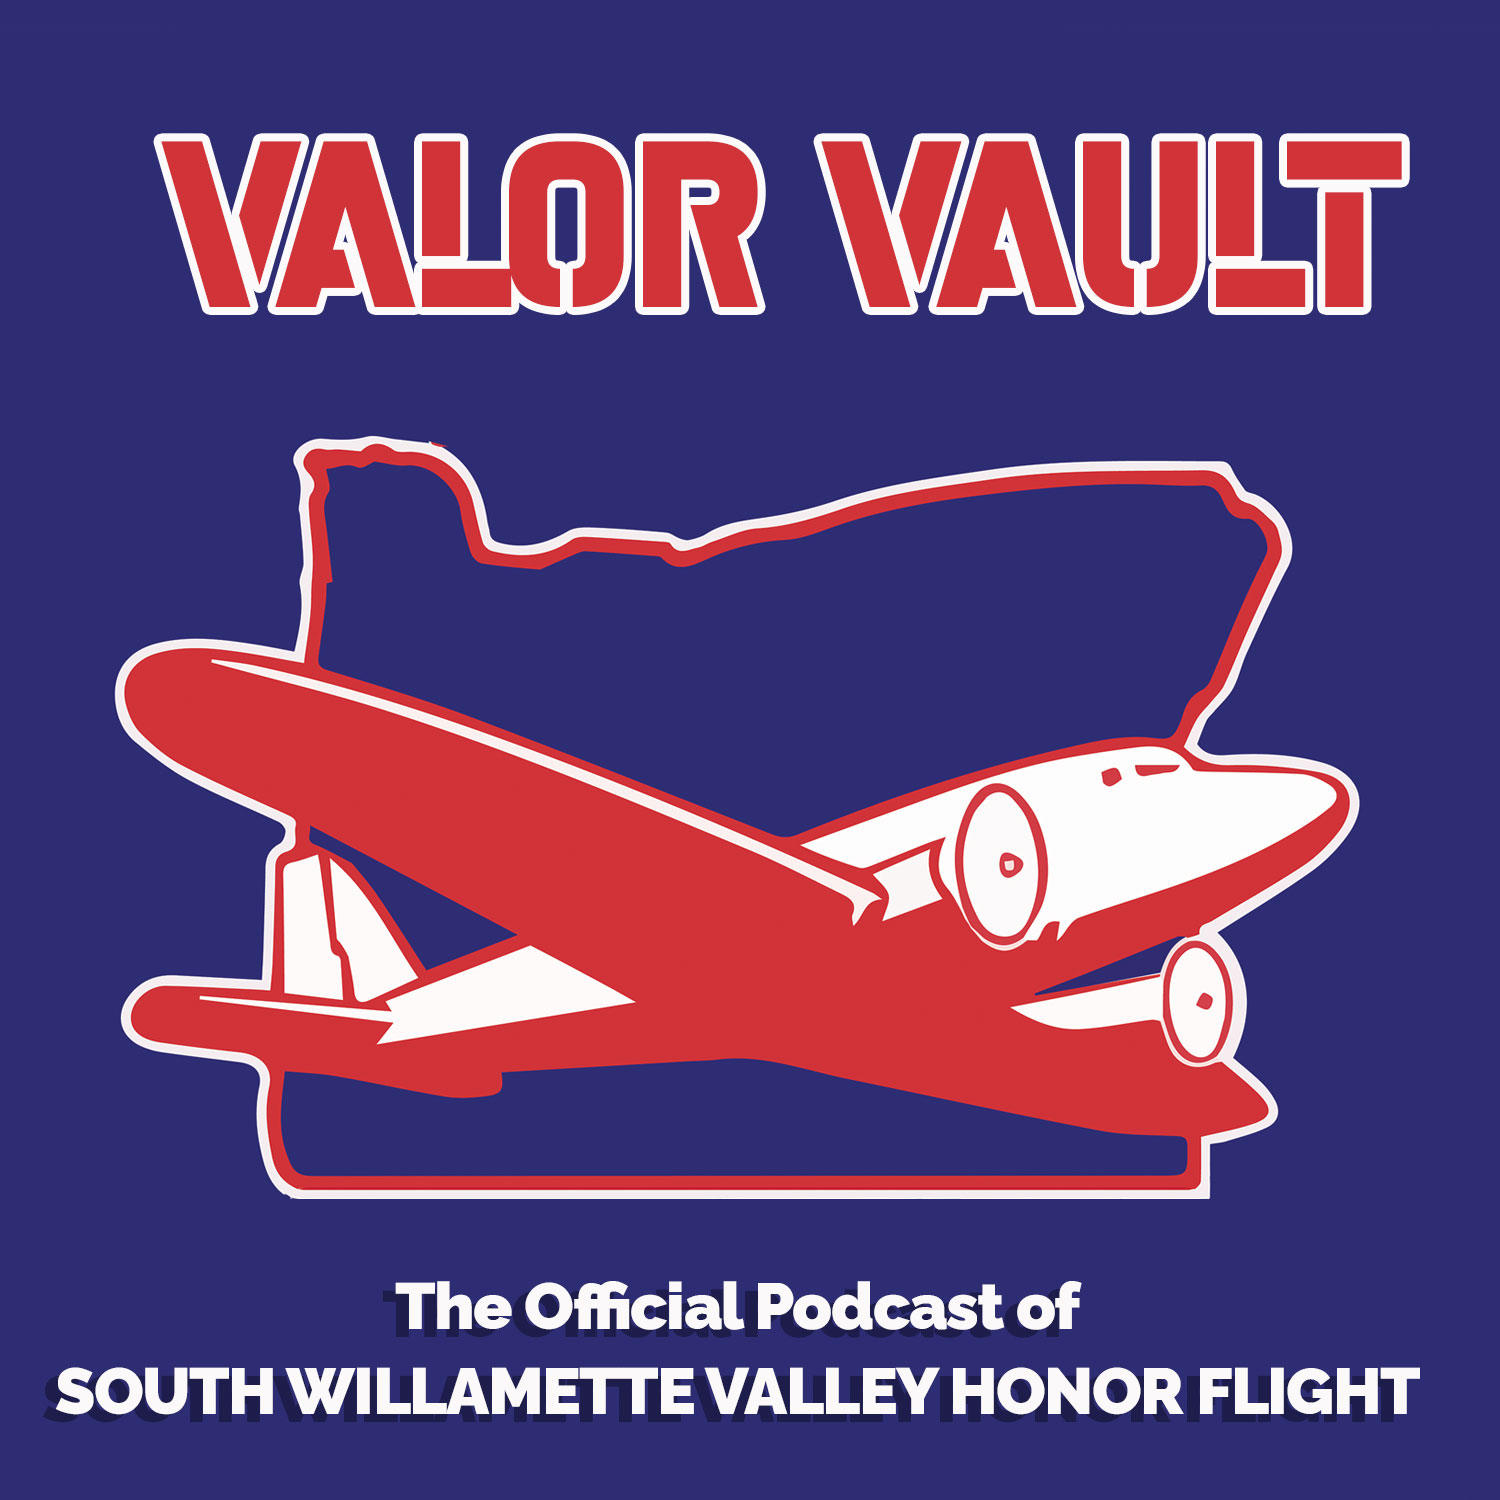 The Valor Vault Podcast - From South Willamette Valley Honor Flight